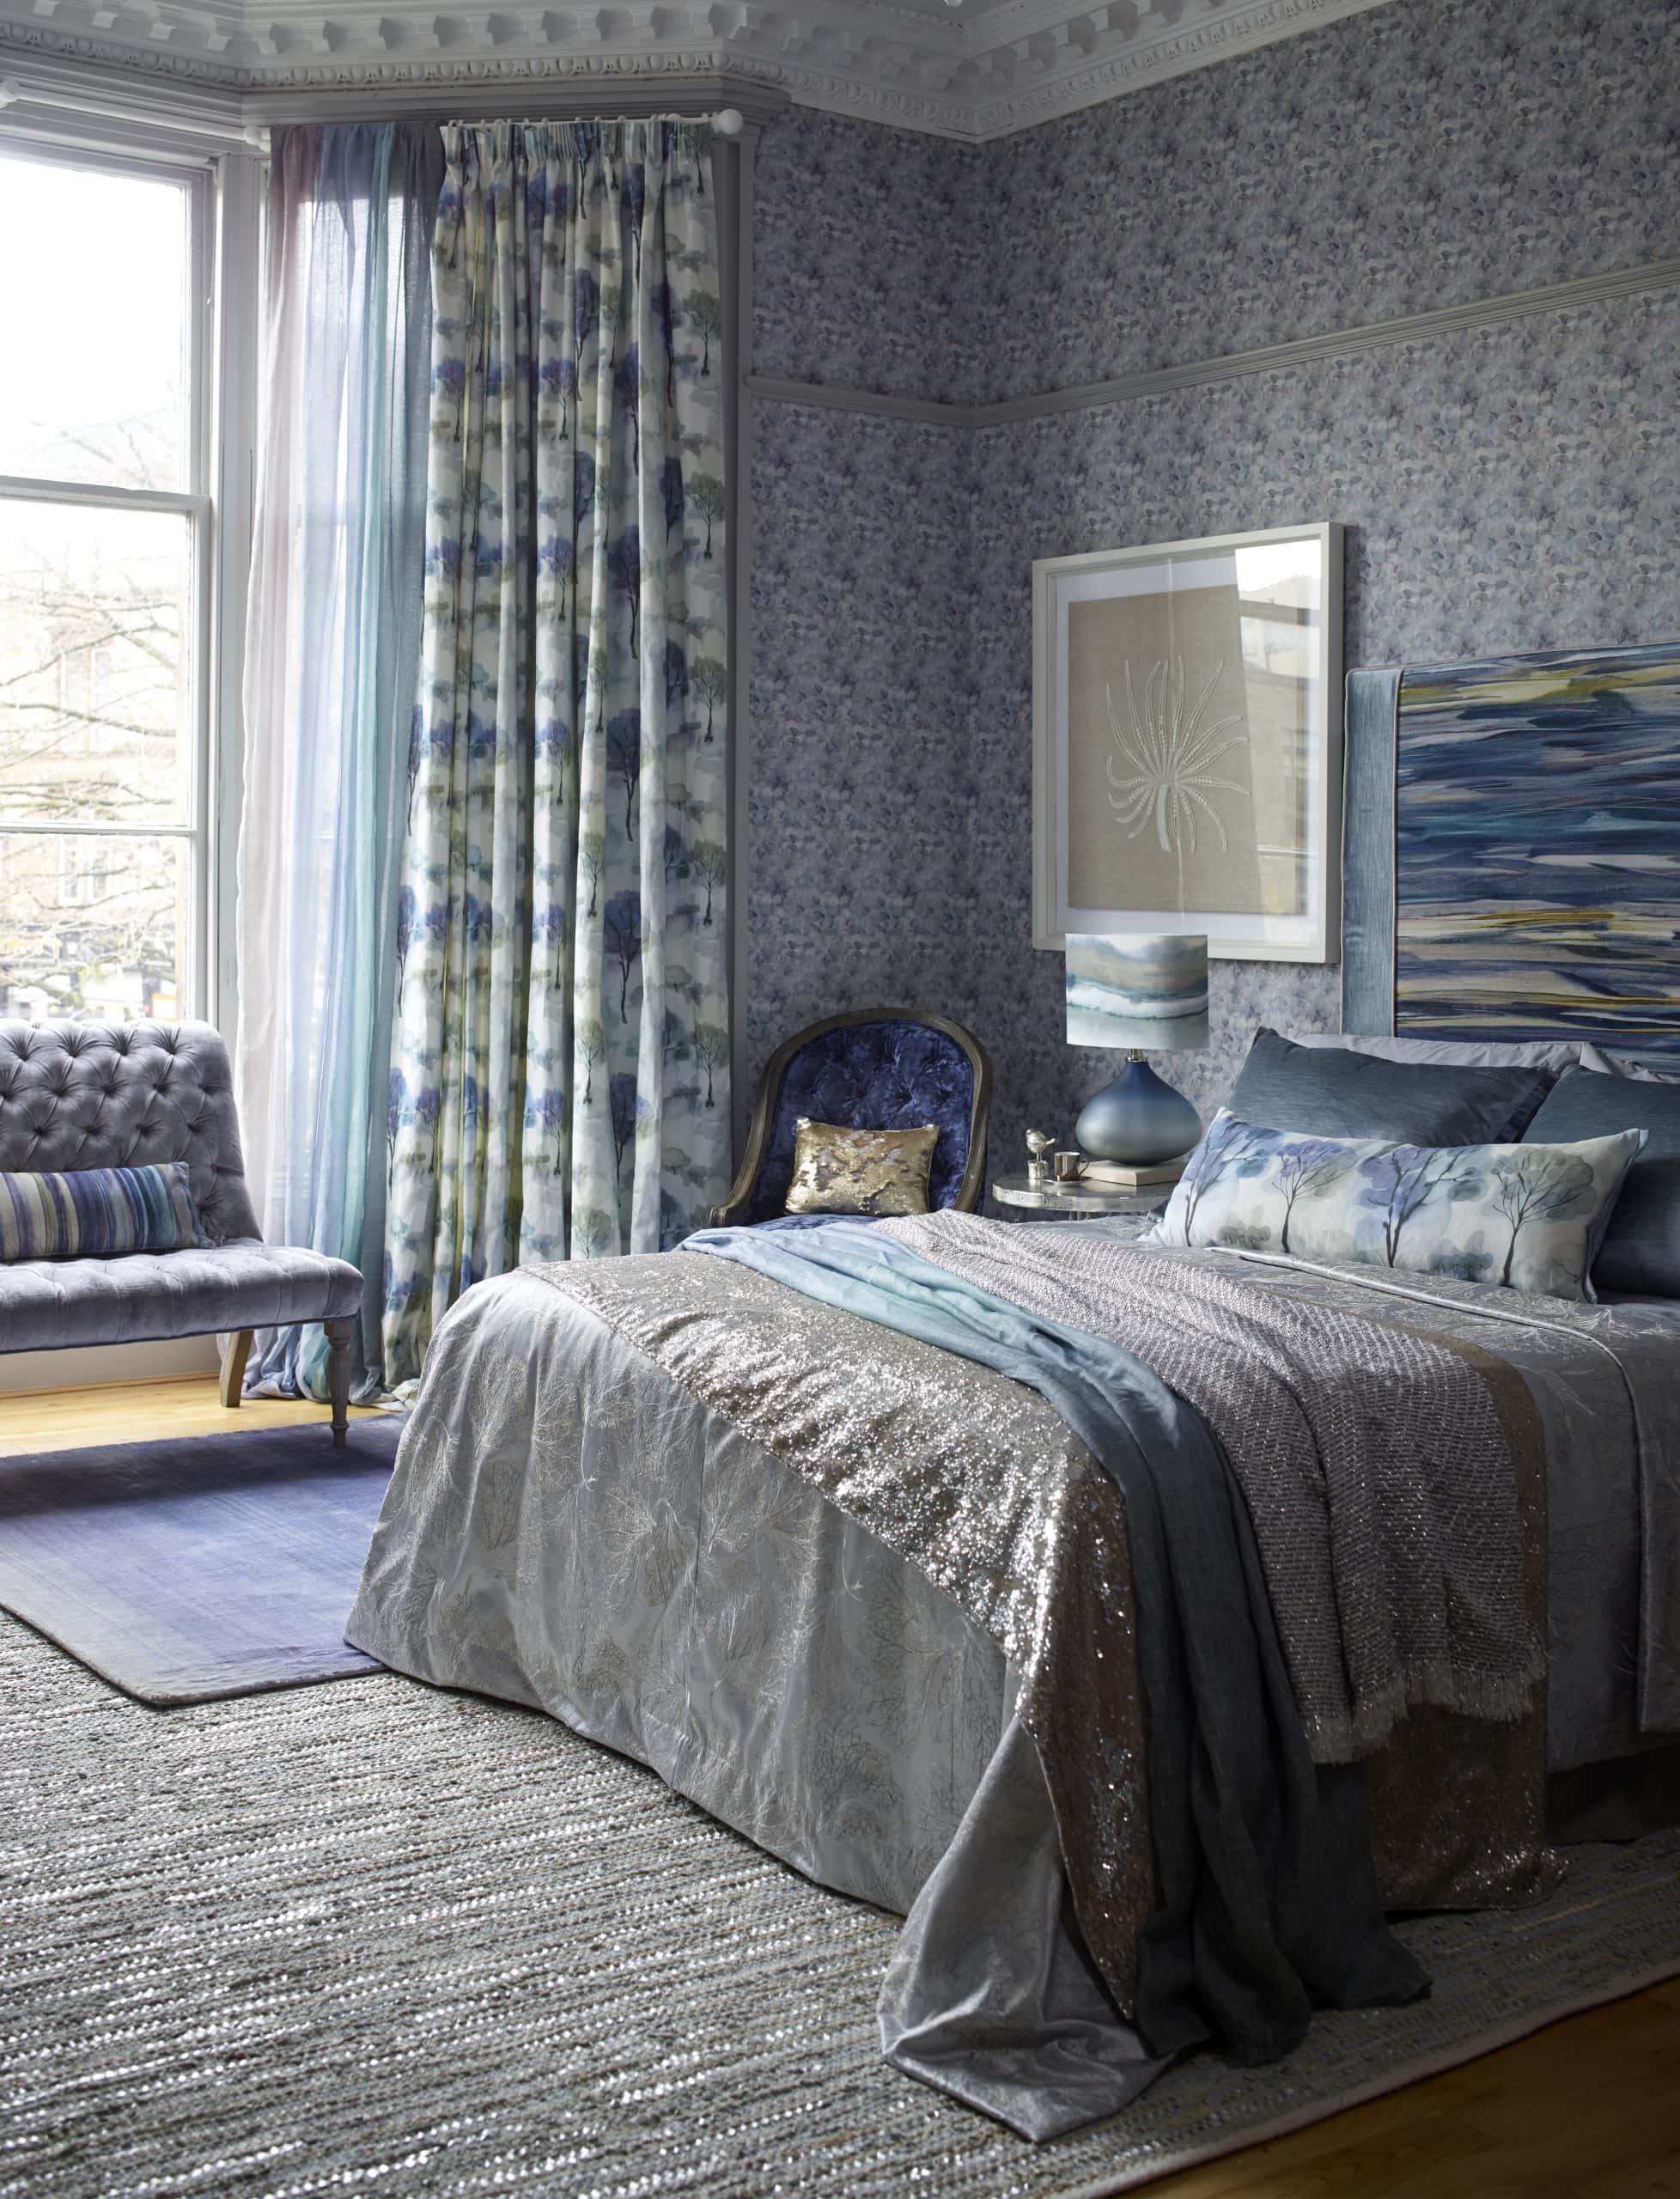 Alchemy Curtains for a bedroom - Curtains Norfolk - Norwich Sunblinds